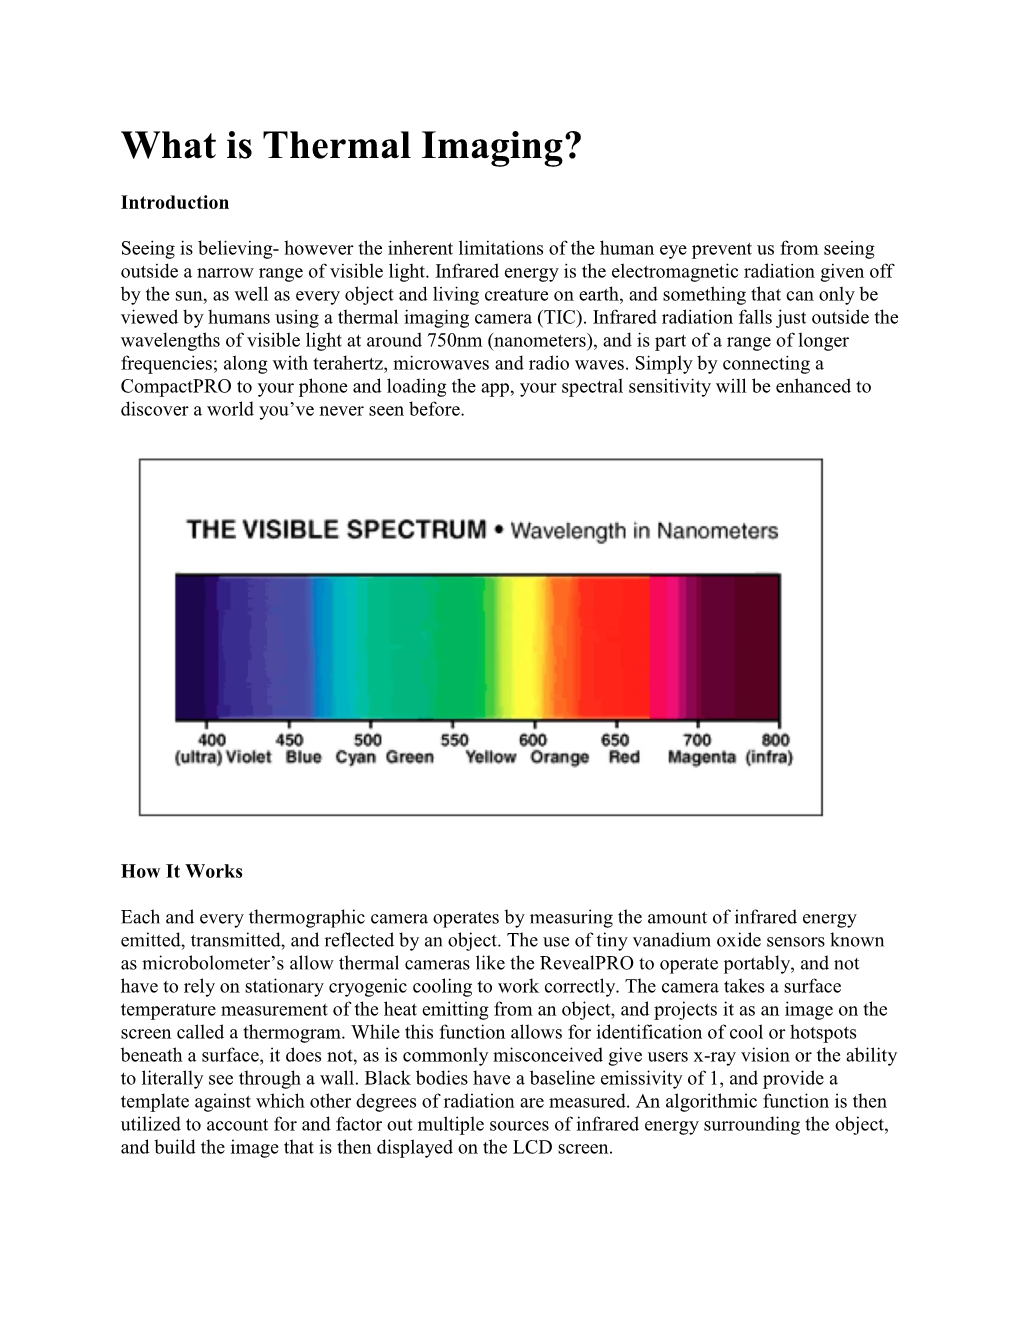 What Is Thermal Imaging?